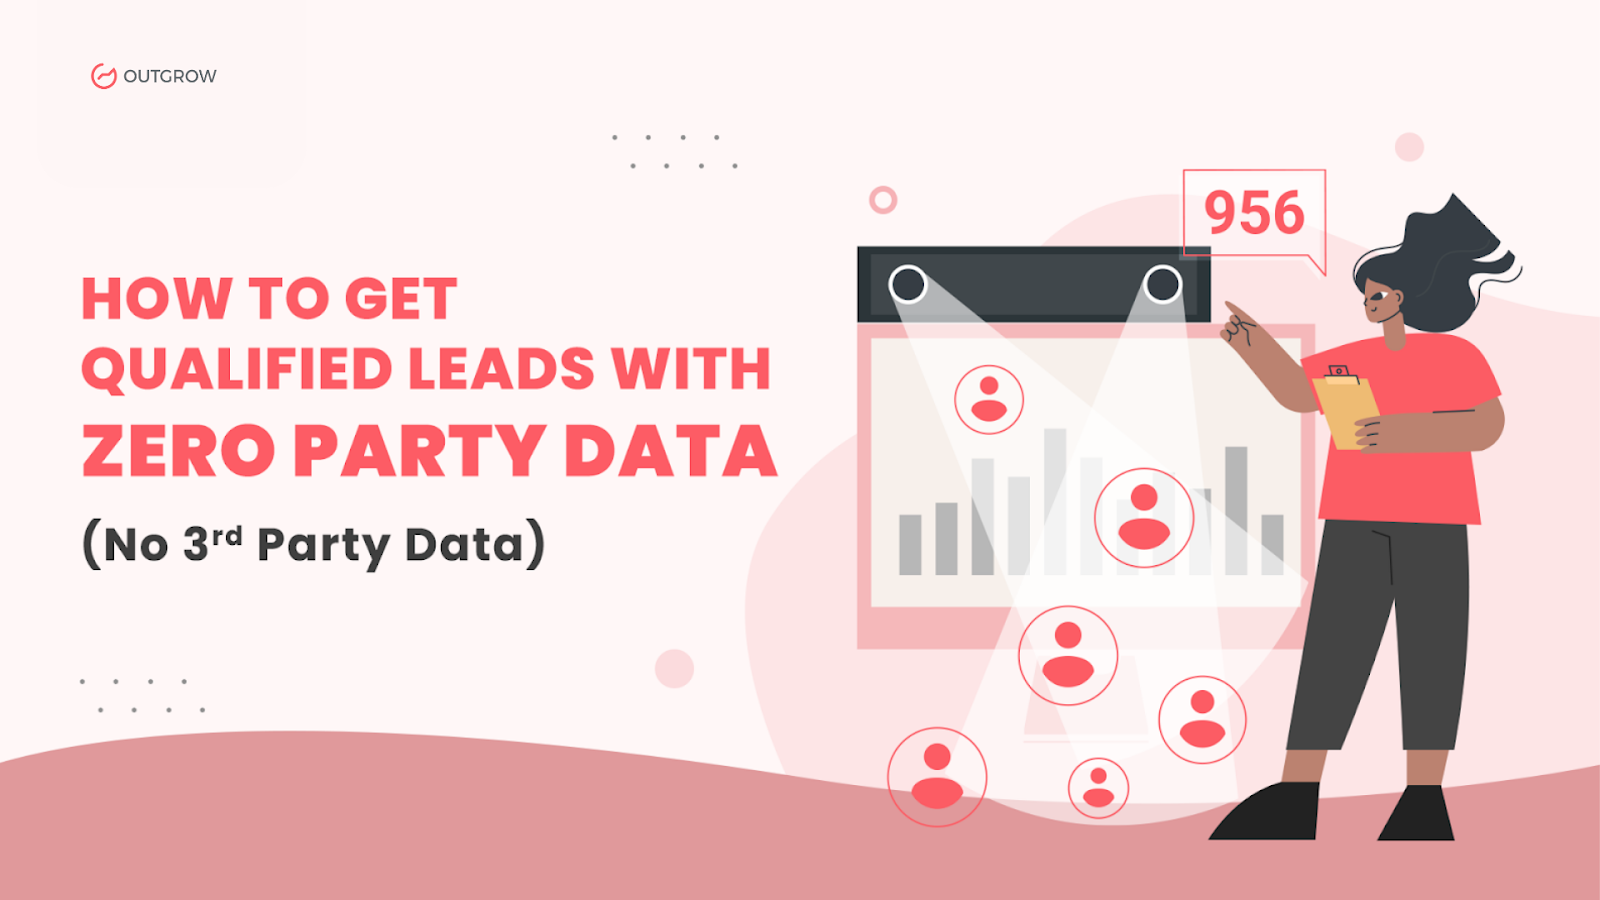 #How to Get Qualified Leads With Zero Party Data (No 3rd Party Data)